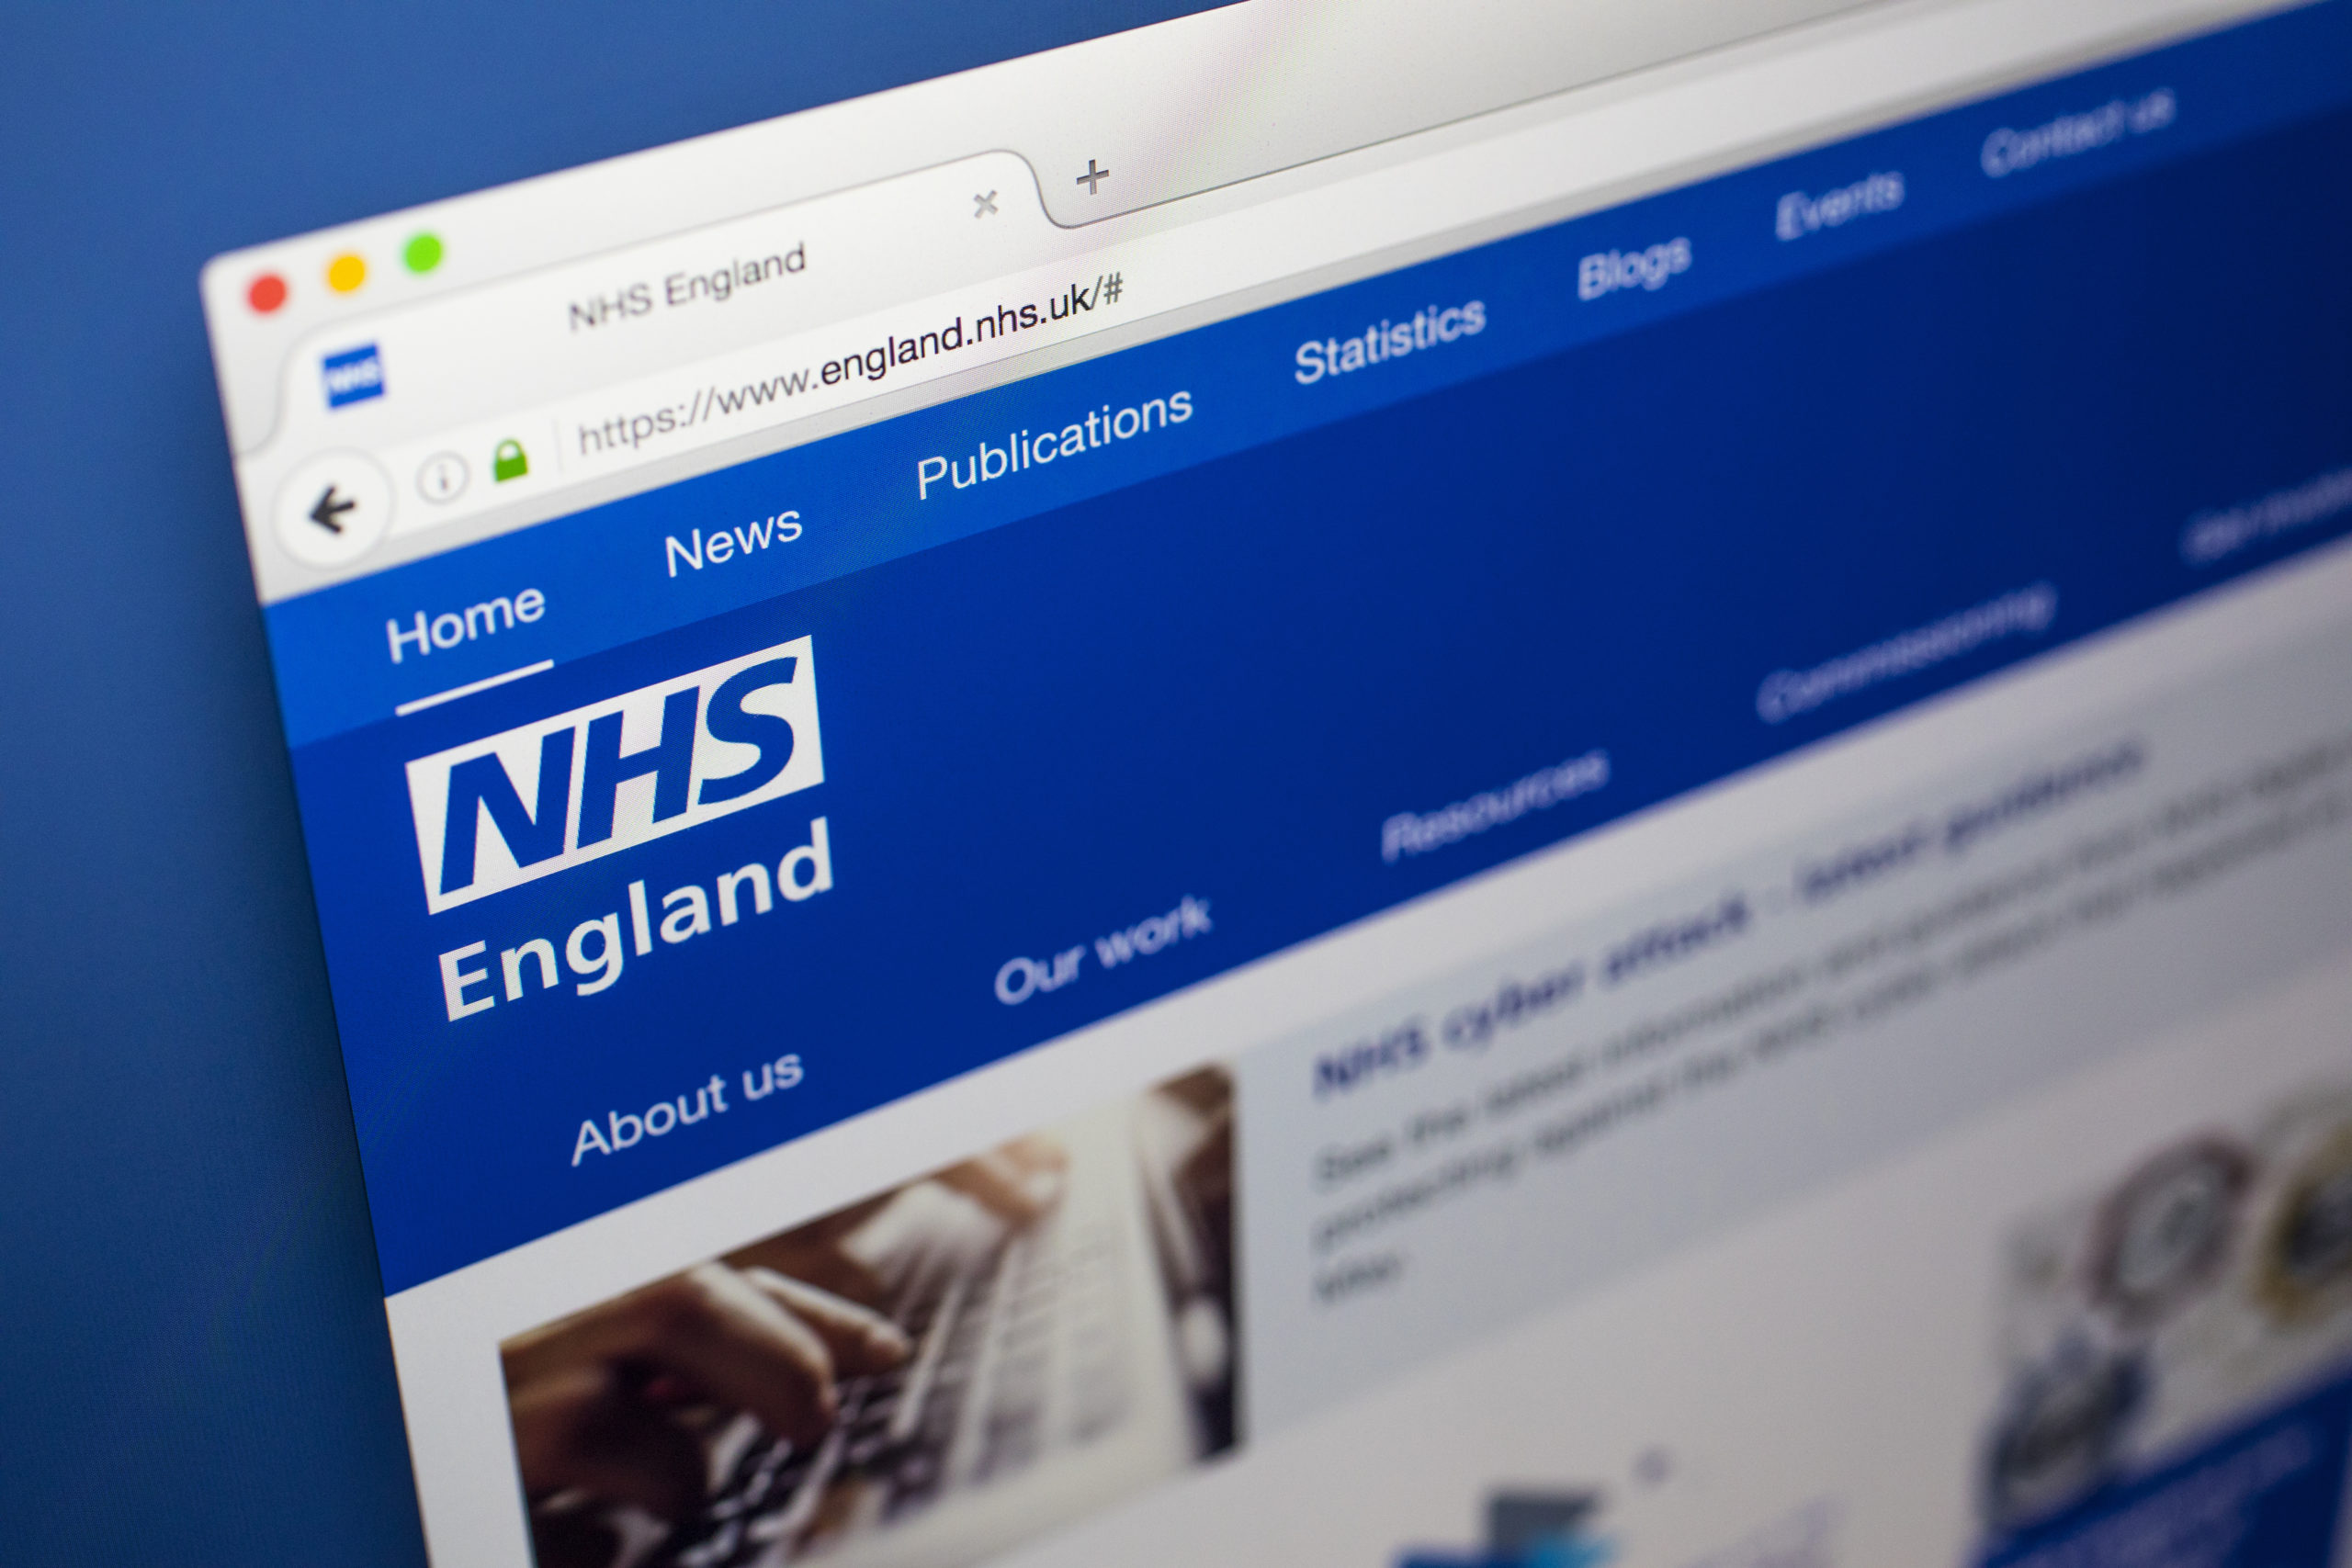 bma-asks-nhs-england-s-new-ceo-to-prioritise-workforce-crisis-future